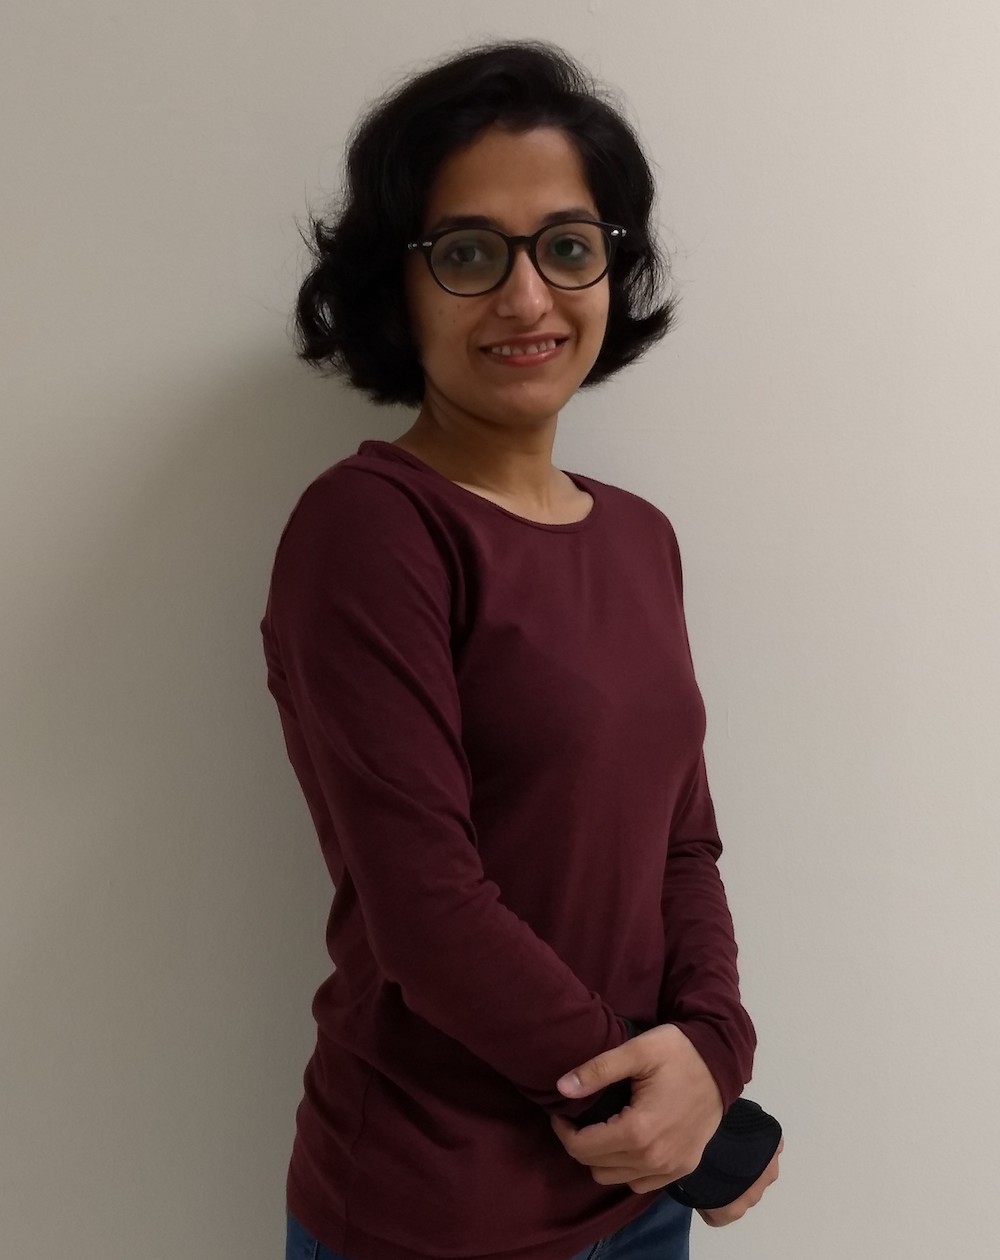 Alankrita Goswami, a doctoral candidate in the College of Agricultural and Environmental Sciences' Department of Agricultural and Applied Economics, received UGA’s 2019 Outstanding Teaching Assistant Award.